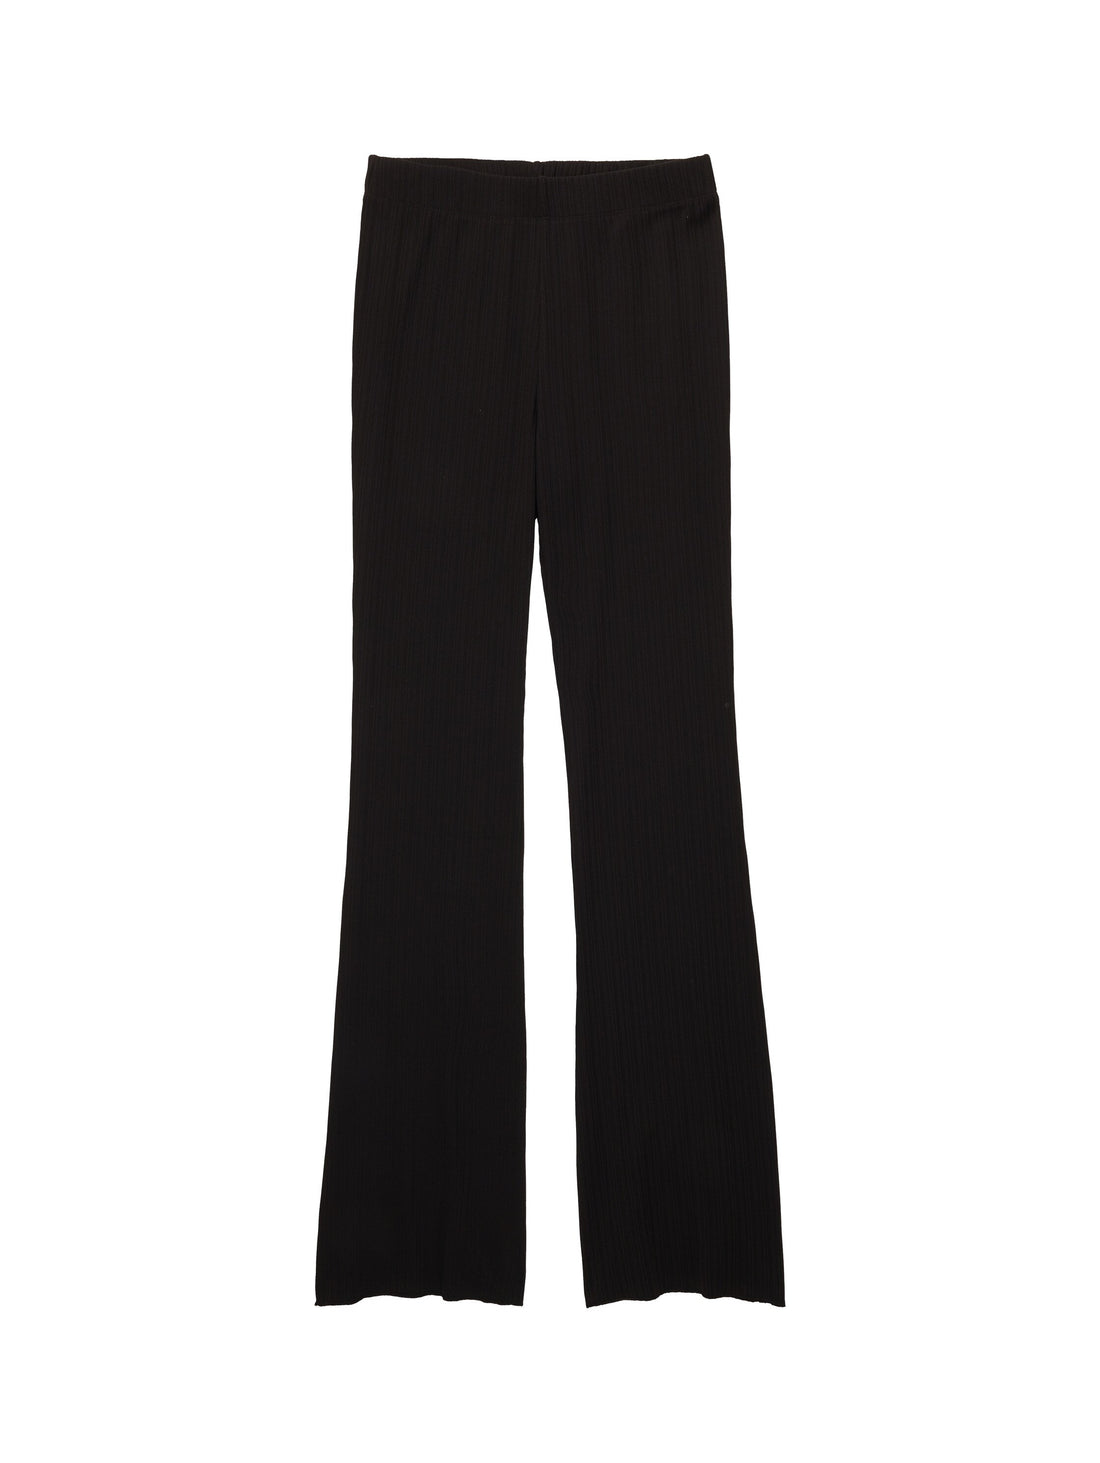 Fitted Slip On Trousers With Flare Bottoms_1038205_14482_01